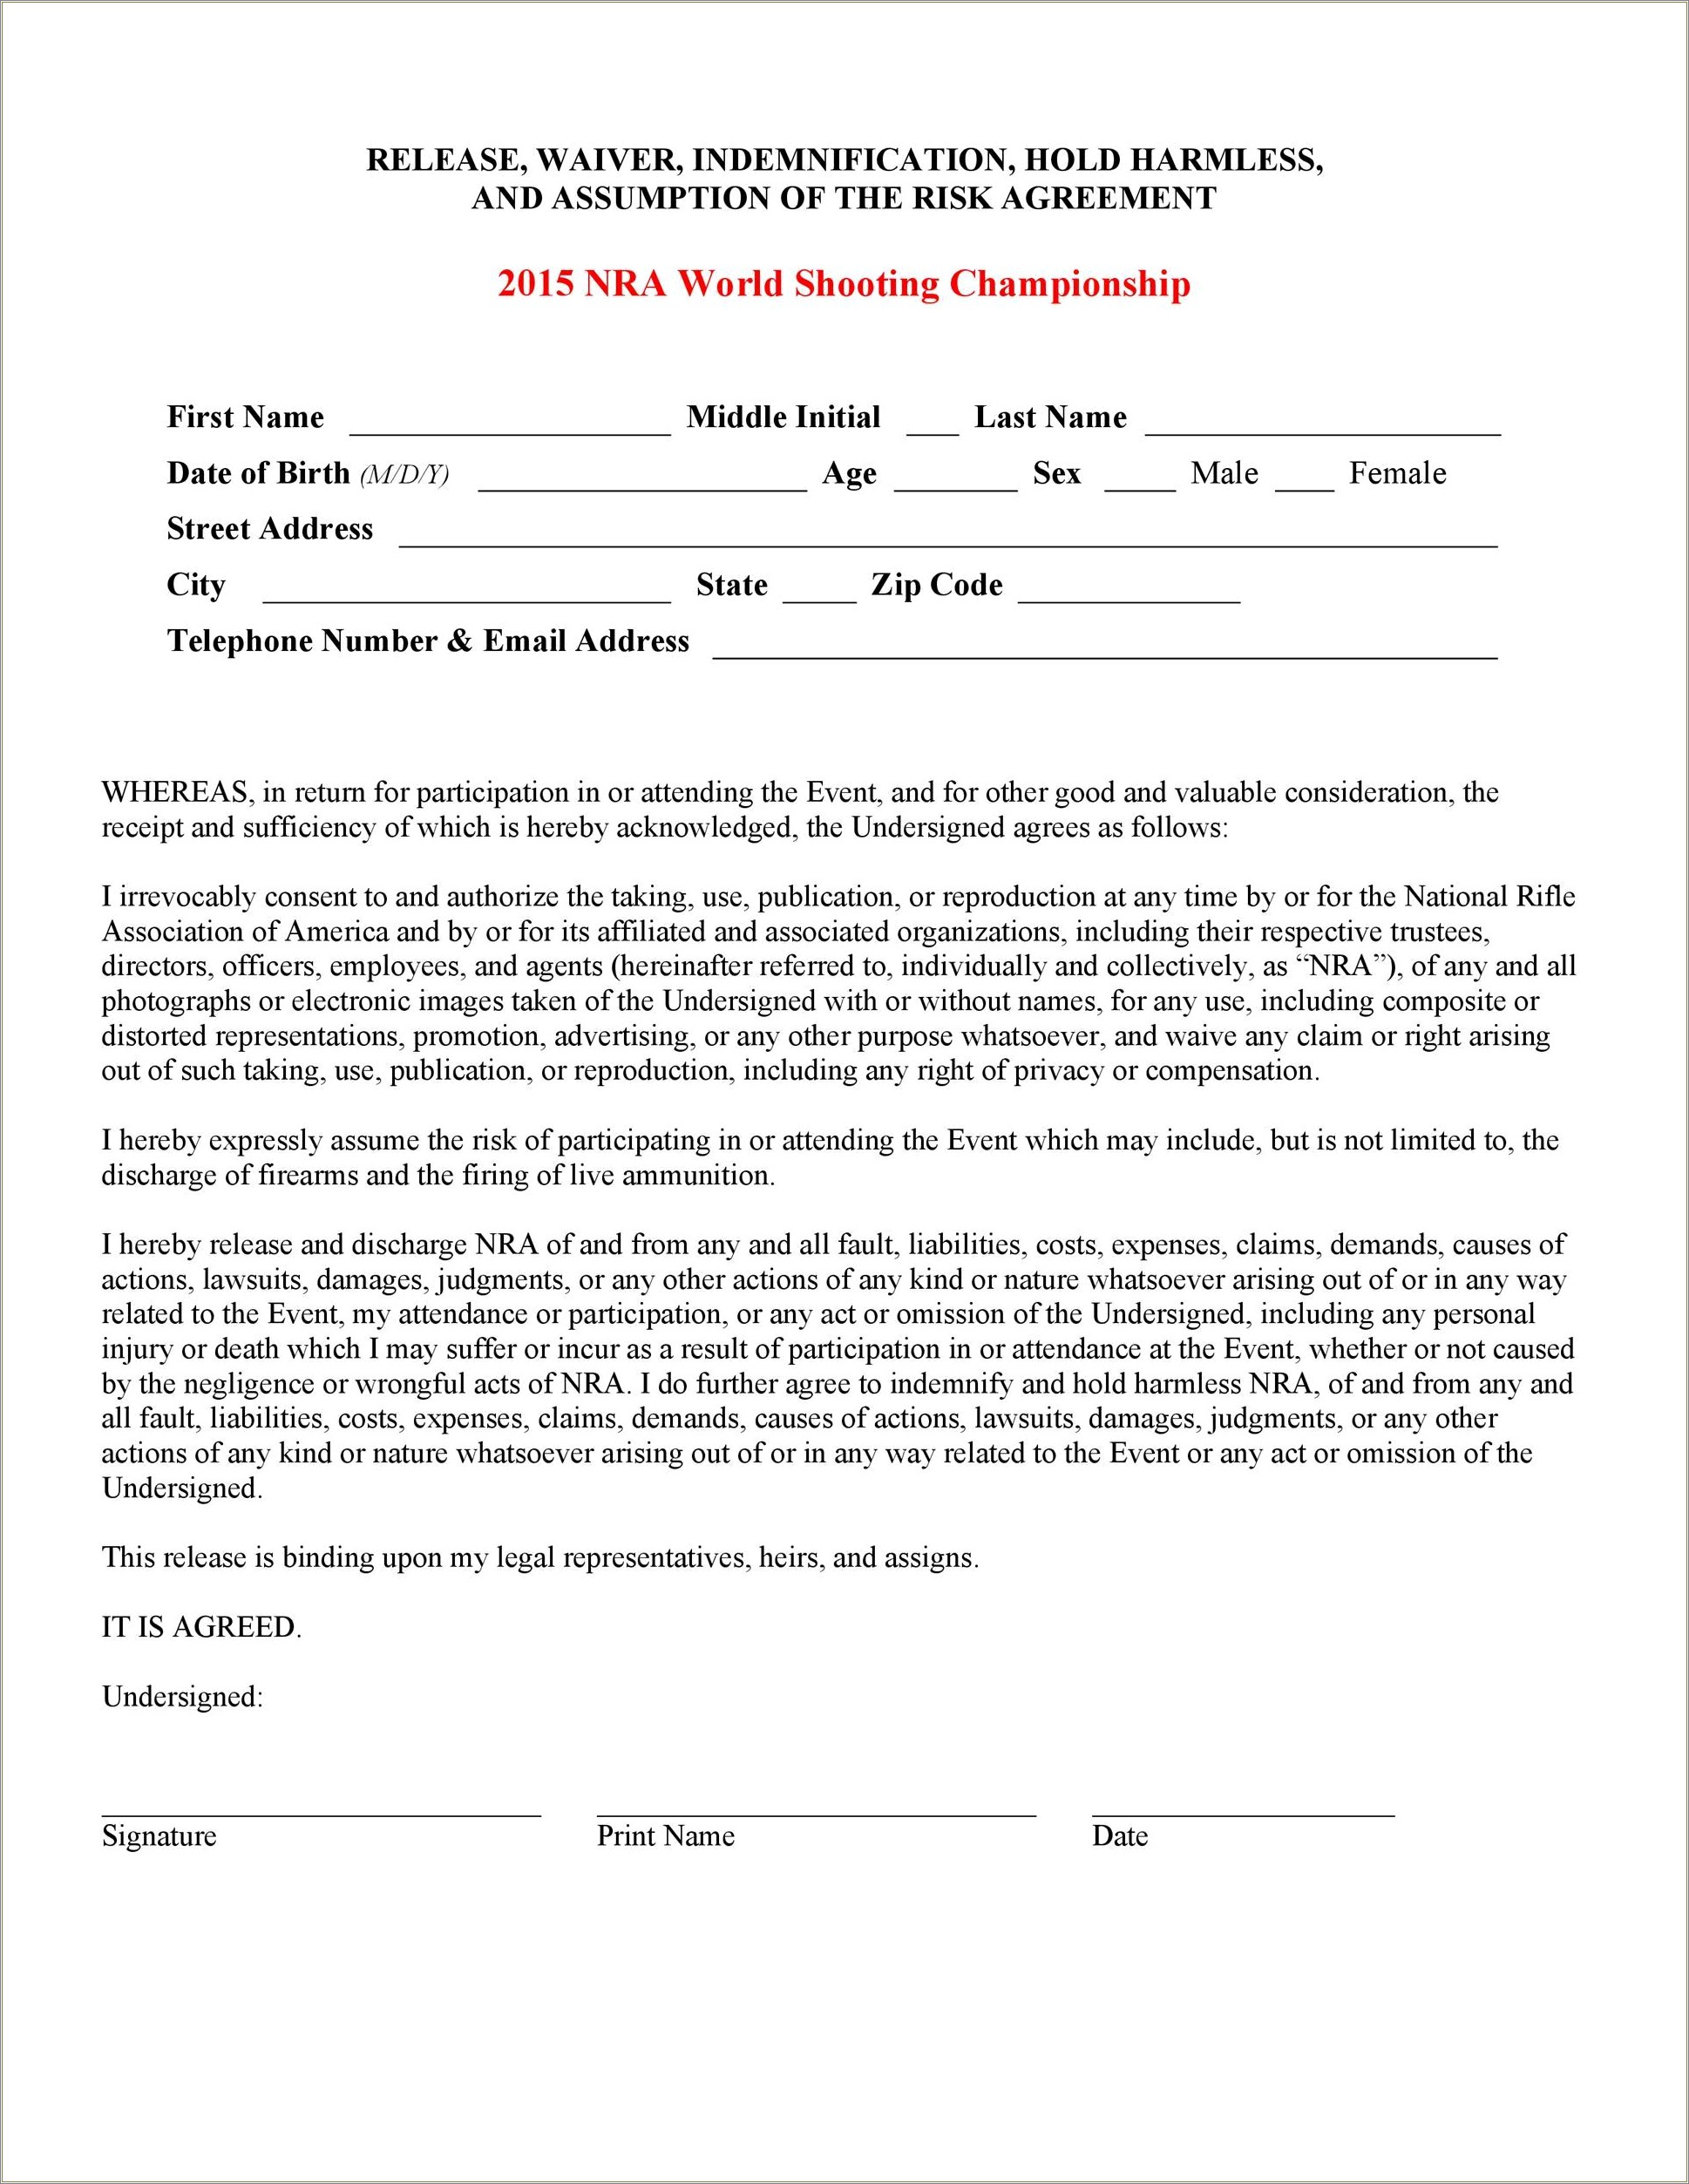 Free Personal Trainer Waiver Form Template